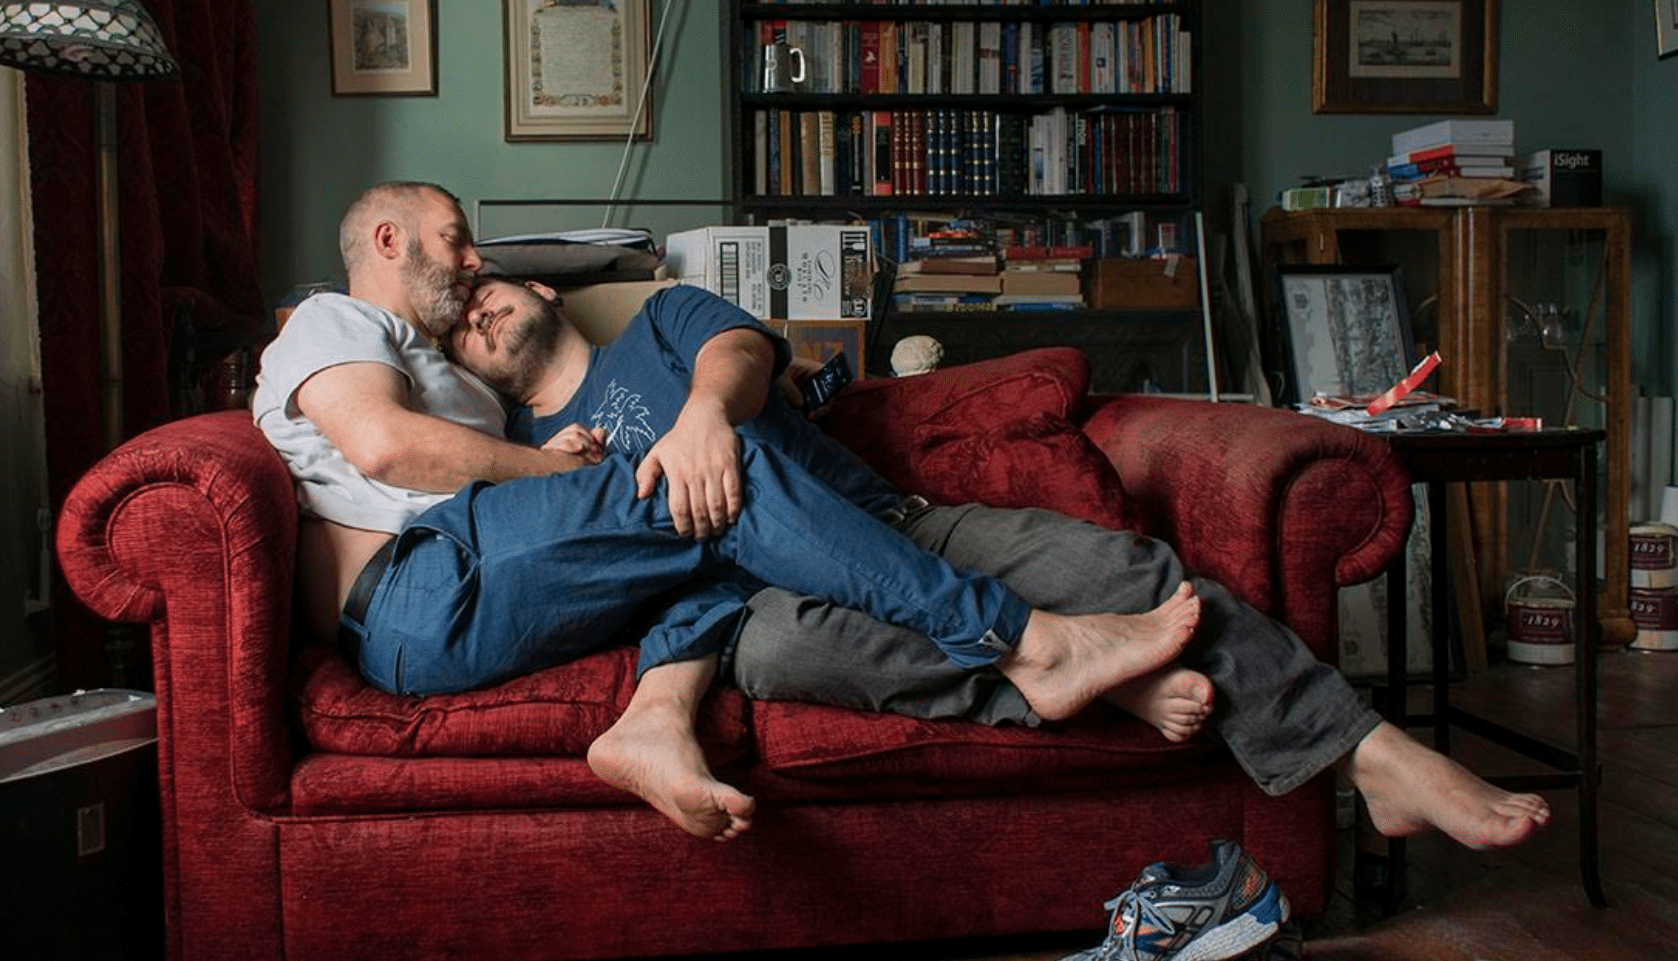 Photo of a gay couple cuddling wins London contest